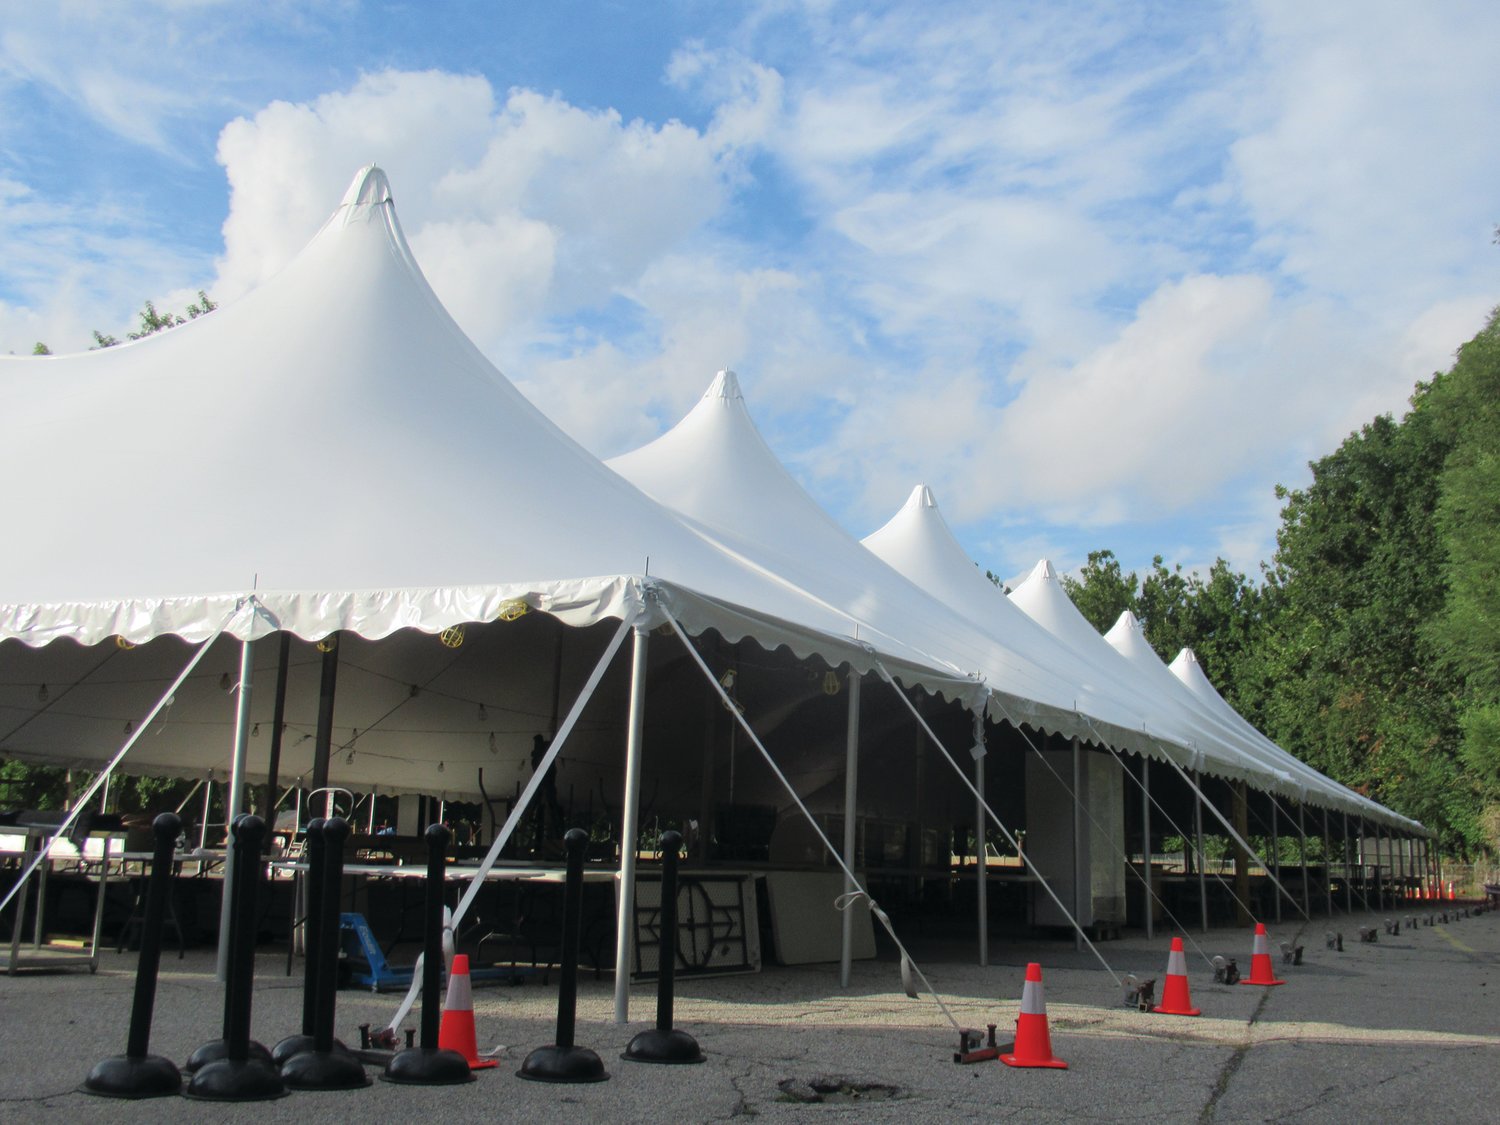 CLASSIC COVERING: This is part of the 120-foot long and 90-foot-wide cathedral tent that will house evening from the doughboy stand to sweet stuff shop to the bar area and entertainment for this weekend’s St. Rocco’s Feast and Festival.